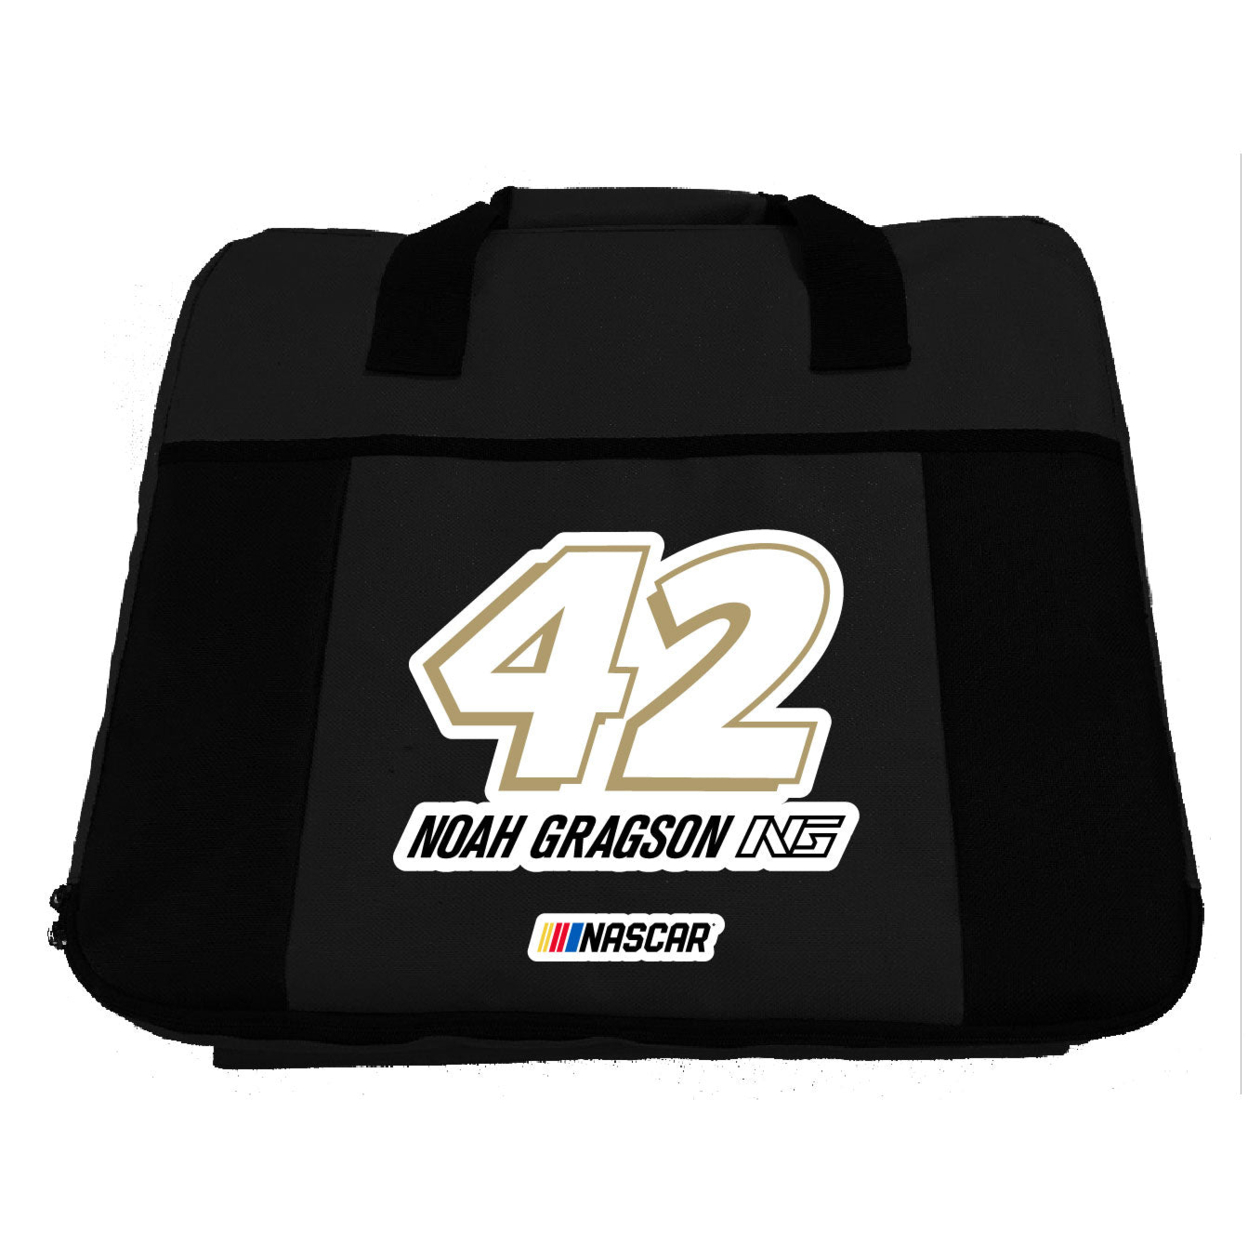 #42 Noah Gragson Officially Licensed Deluxe Seat Cushion